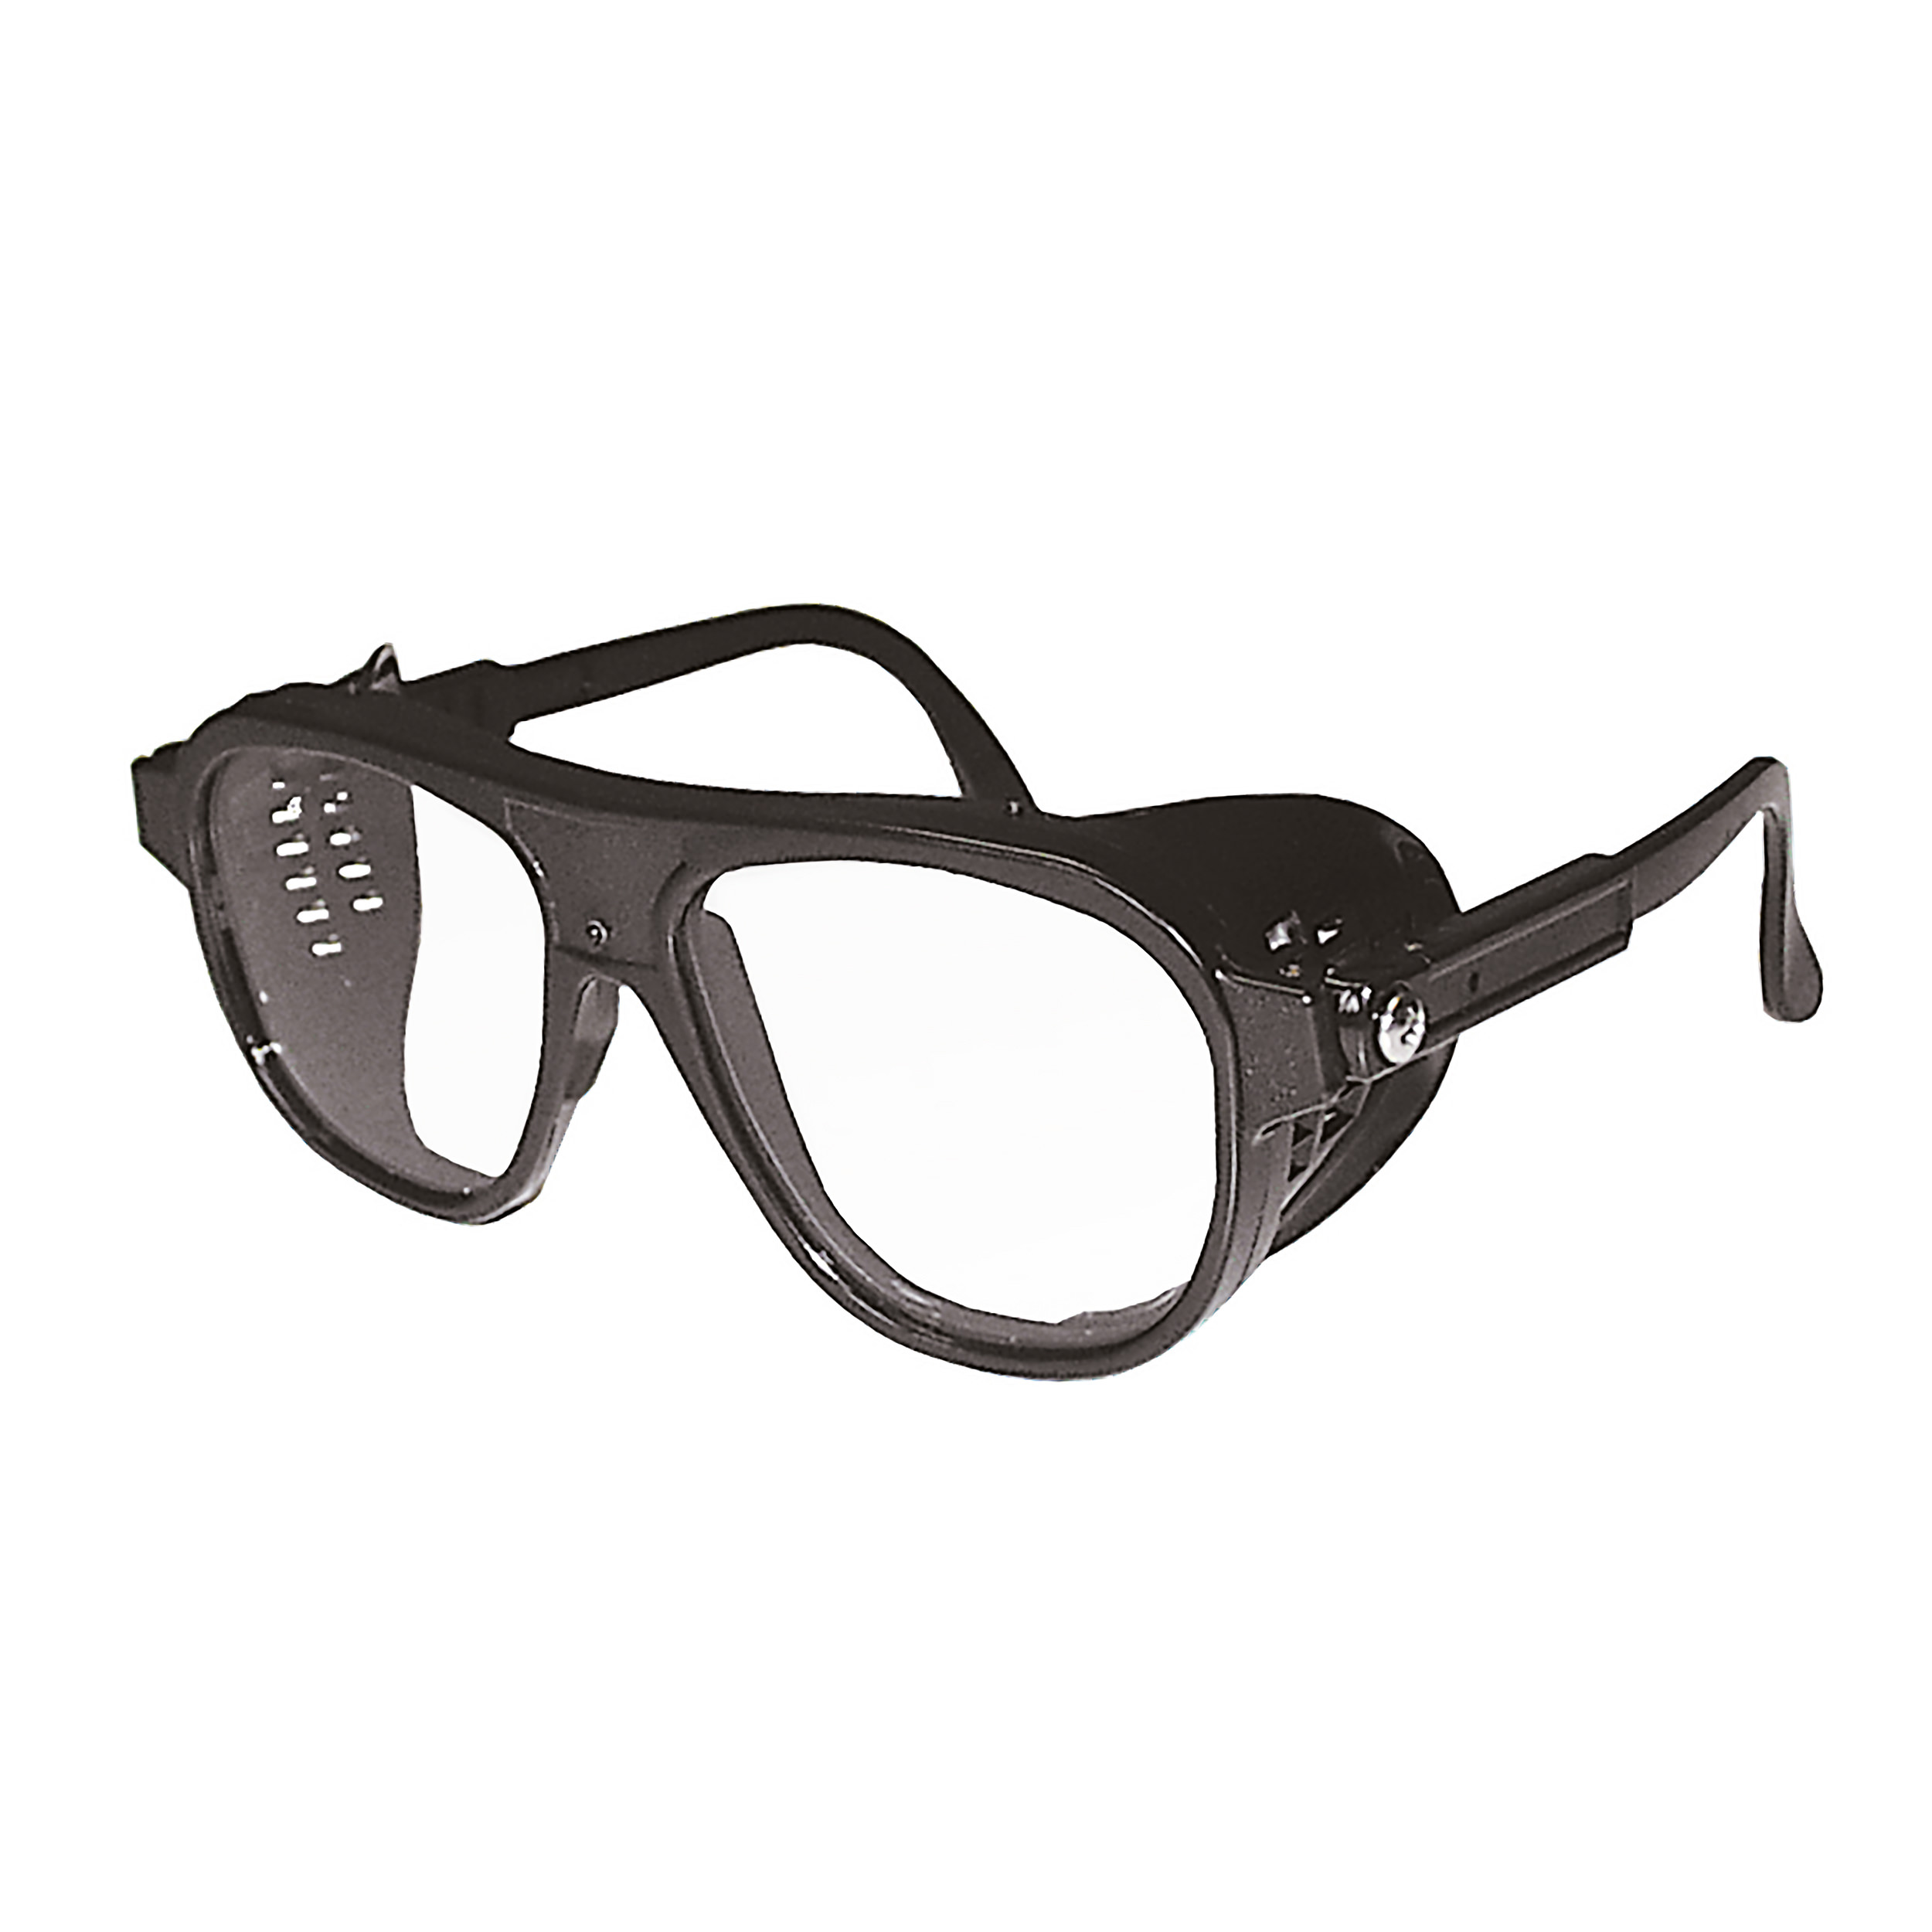 nylon glasses, black, with middle screw and adjustable clamp, glasses oval 52x62mm, colourless, shatterproof